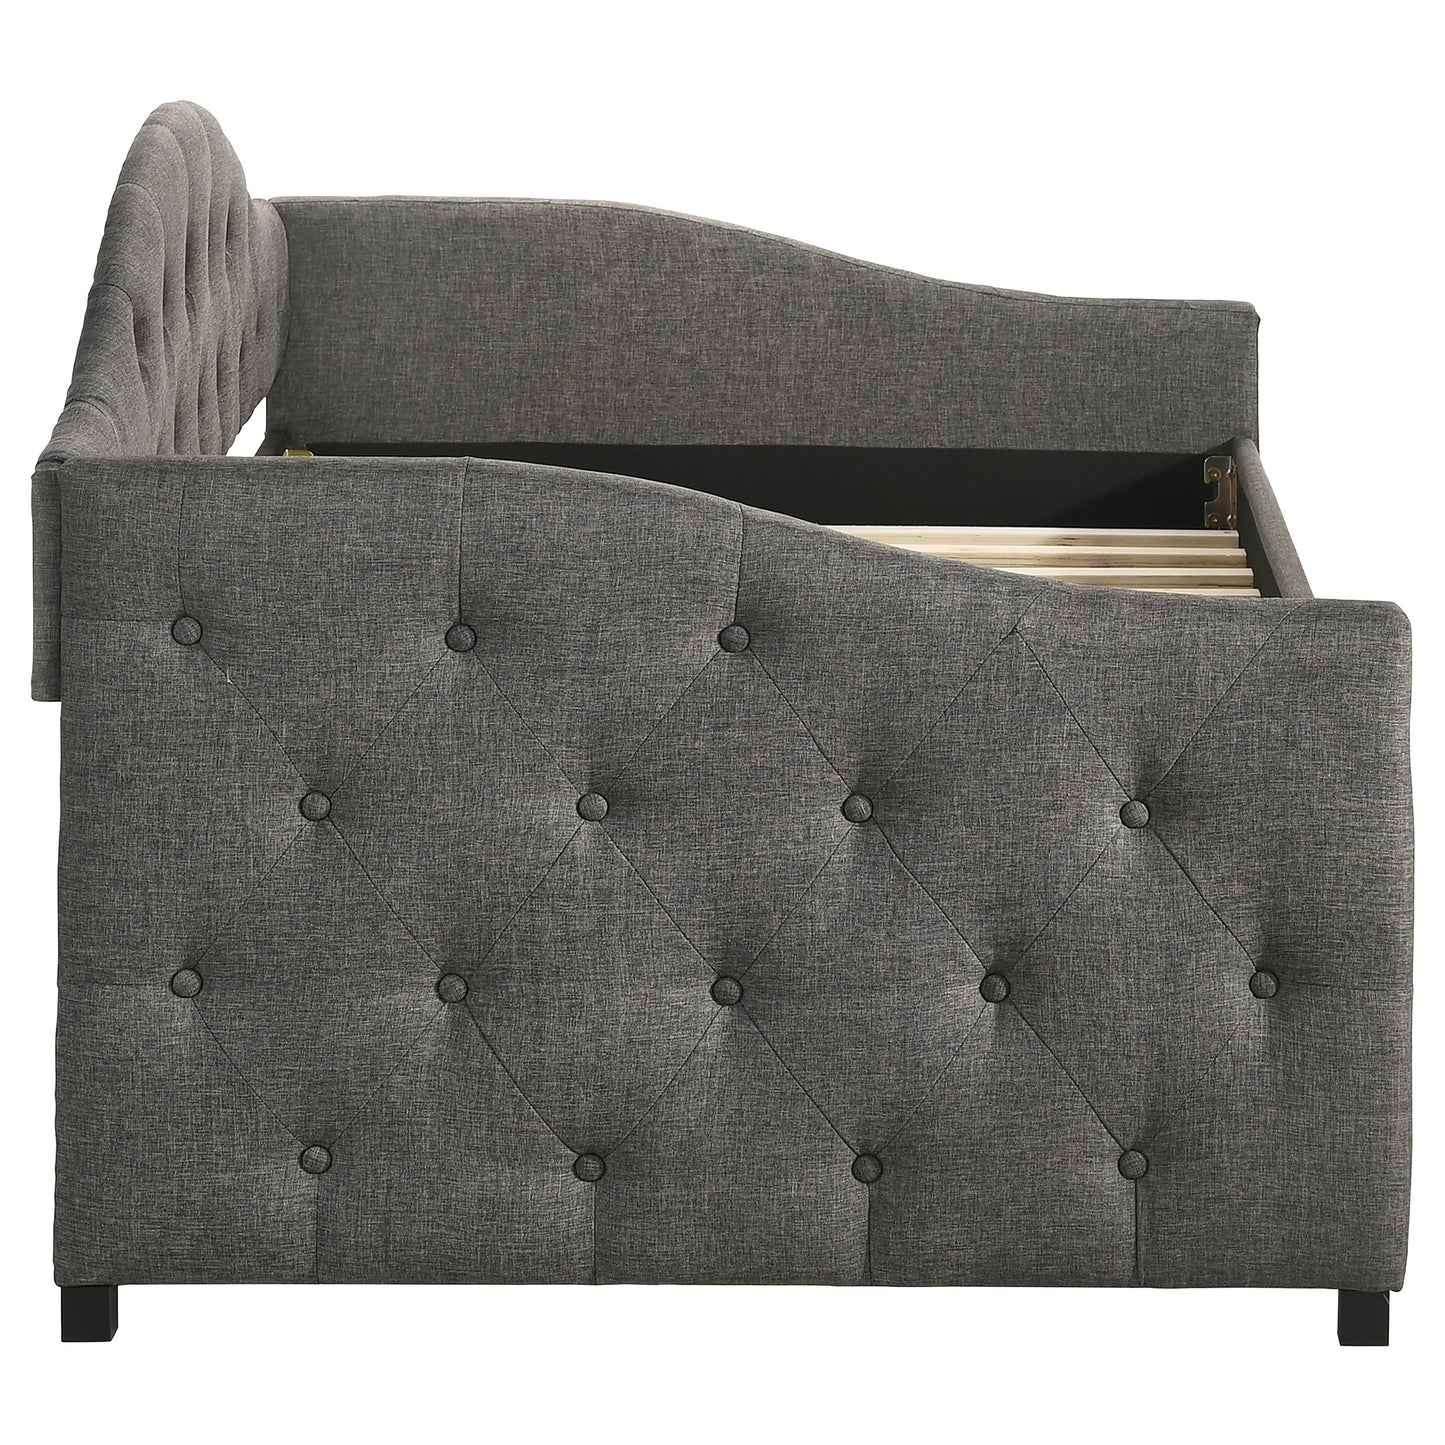 Sadie Upholstered Twin Daybed with Trundle